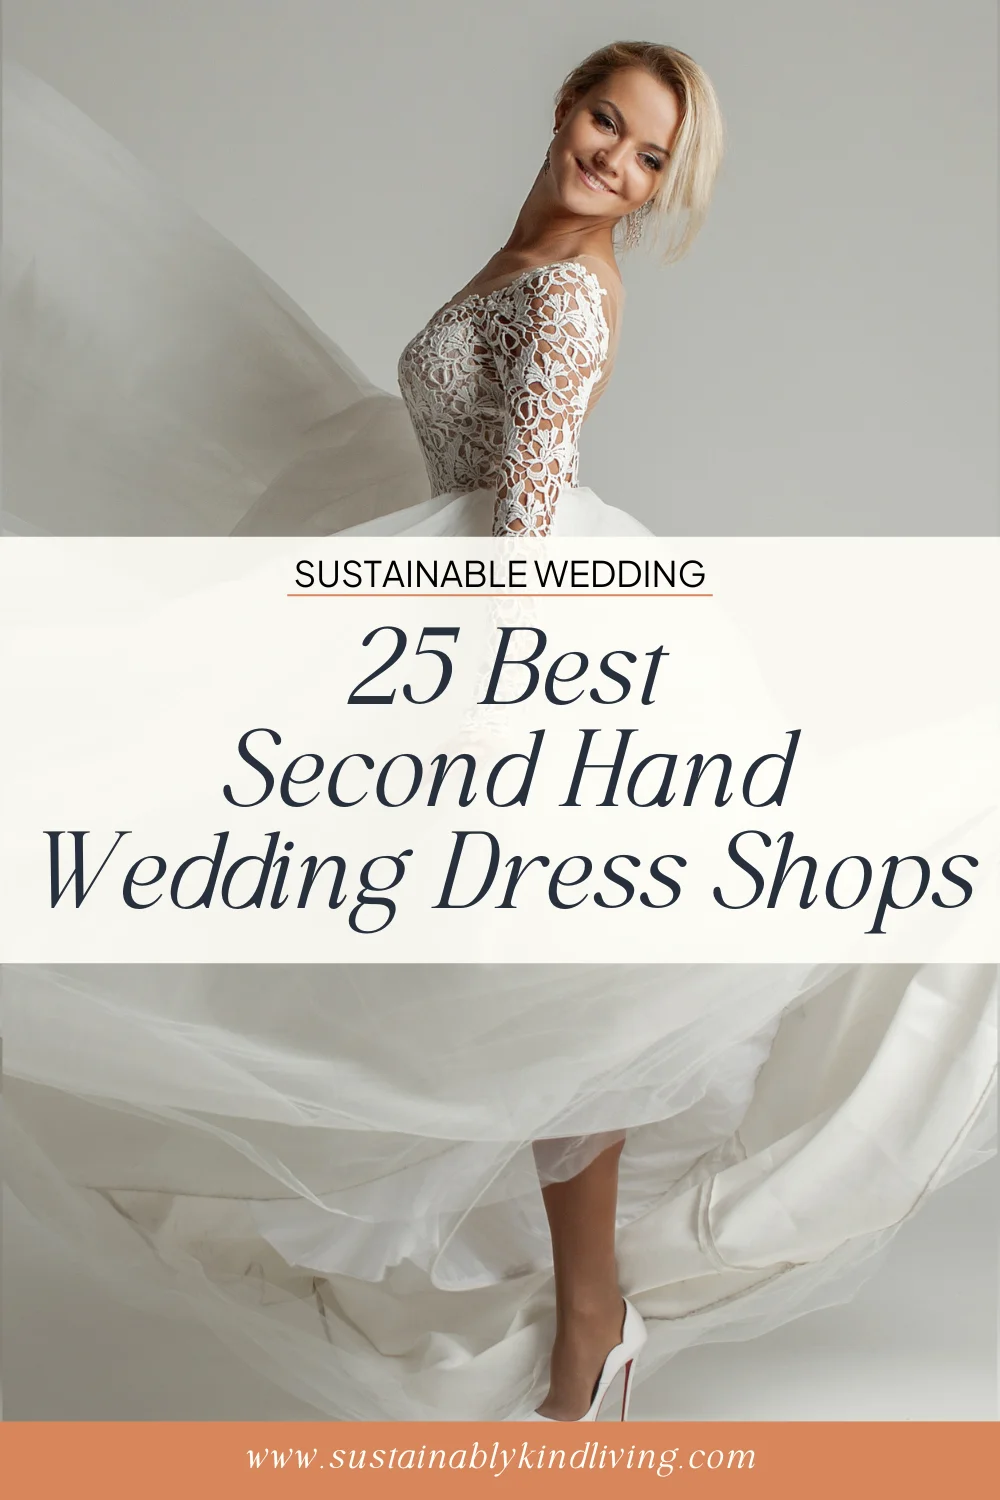 20 Wedding Dresses We Are Obsessed with Right Now from Small Biz